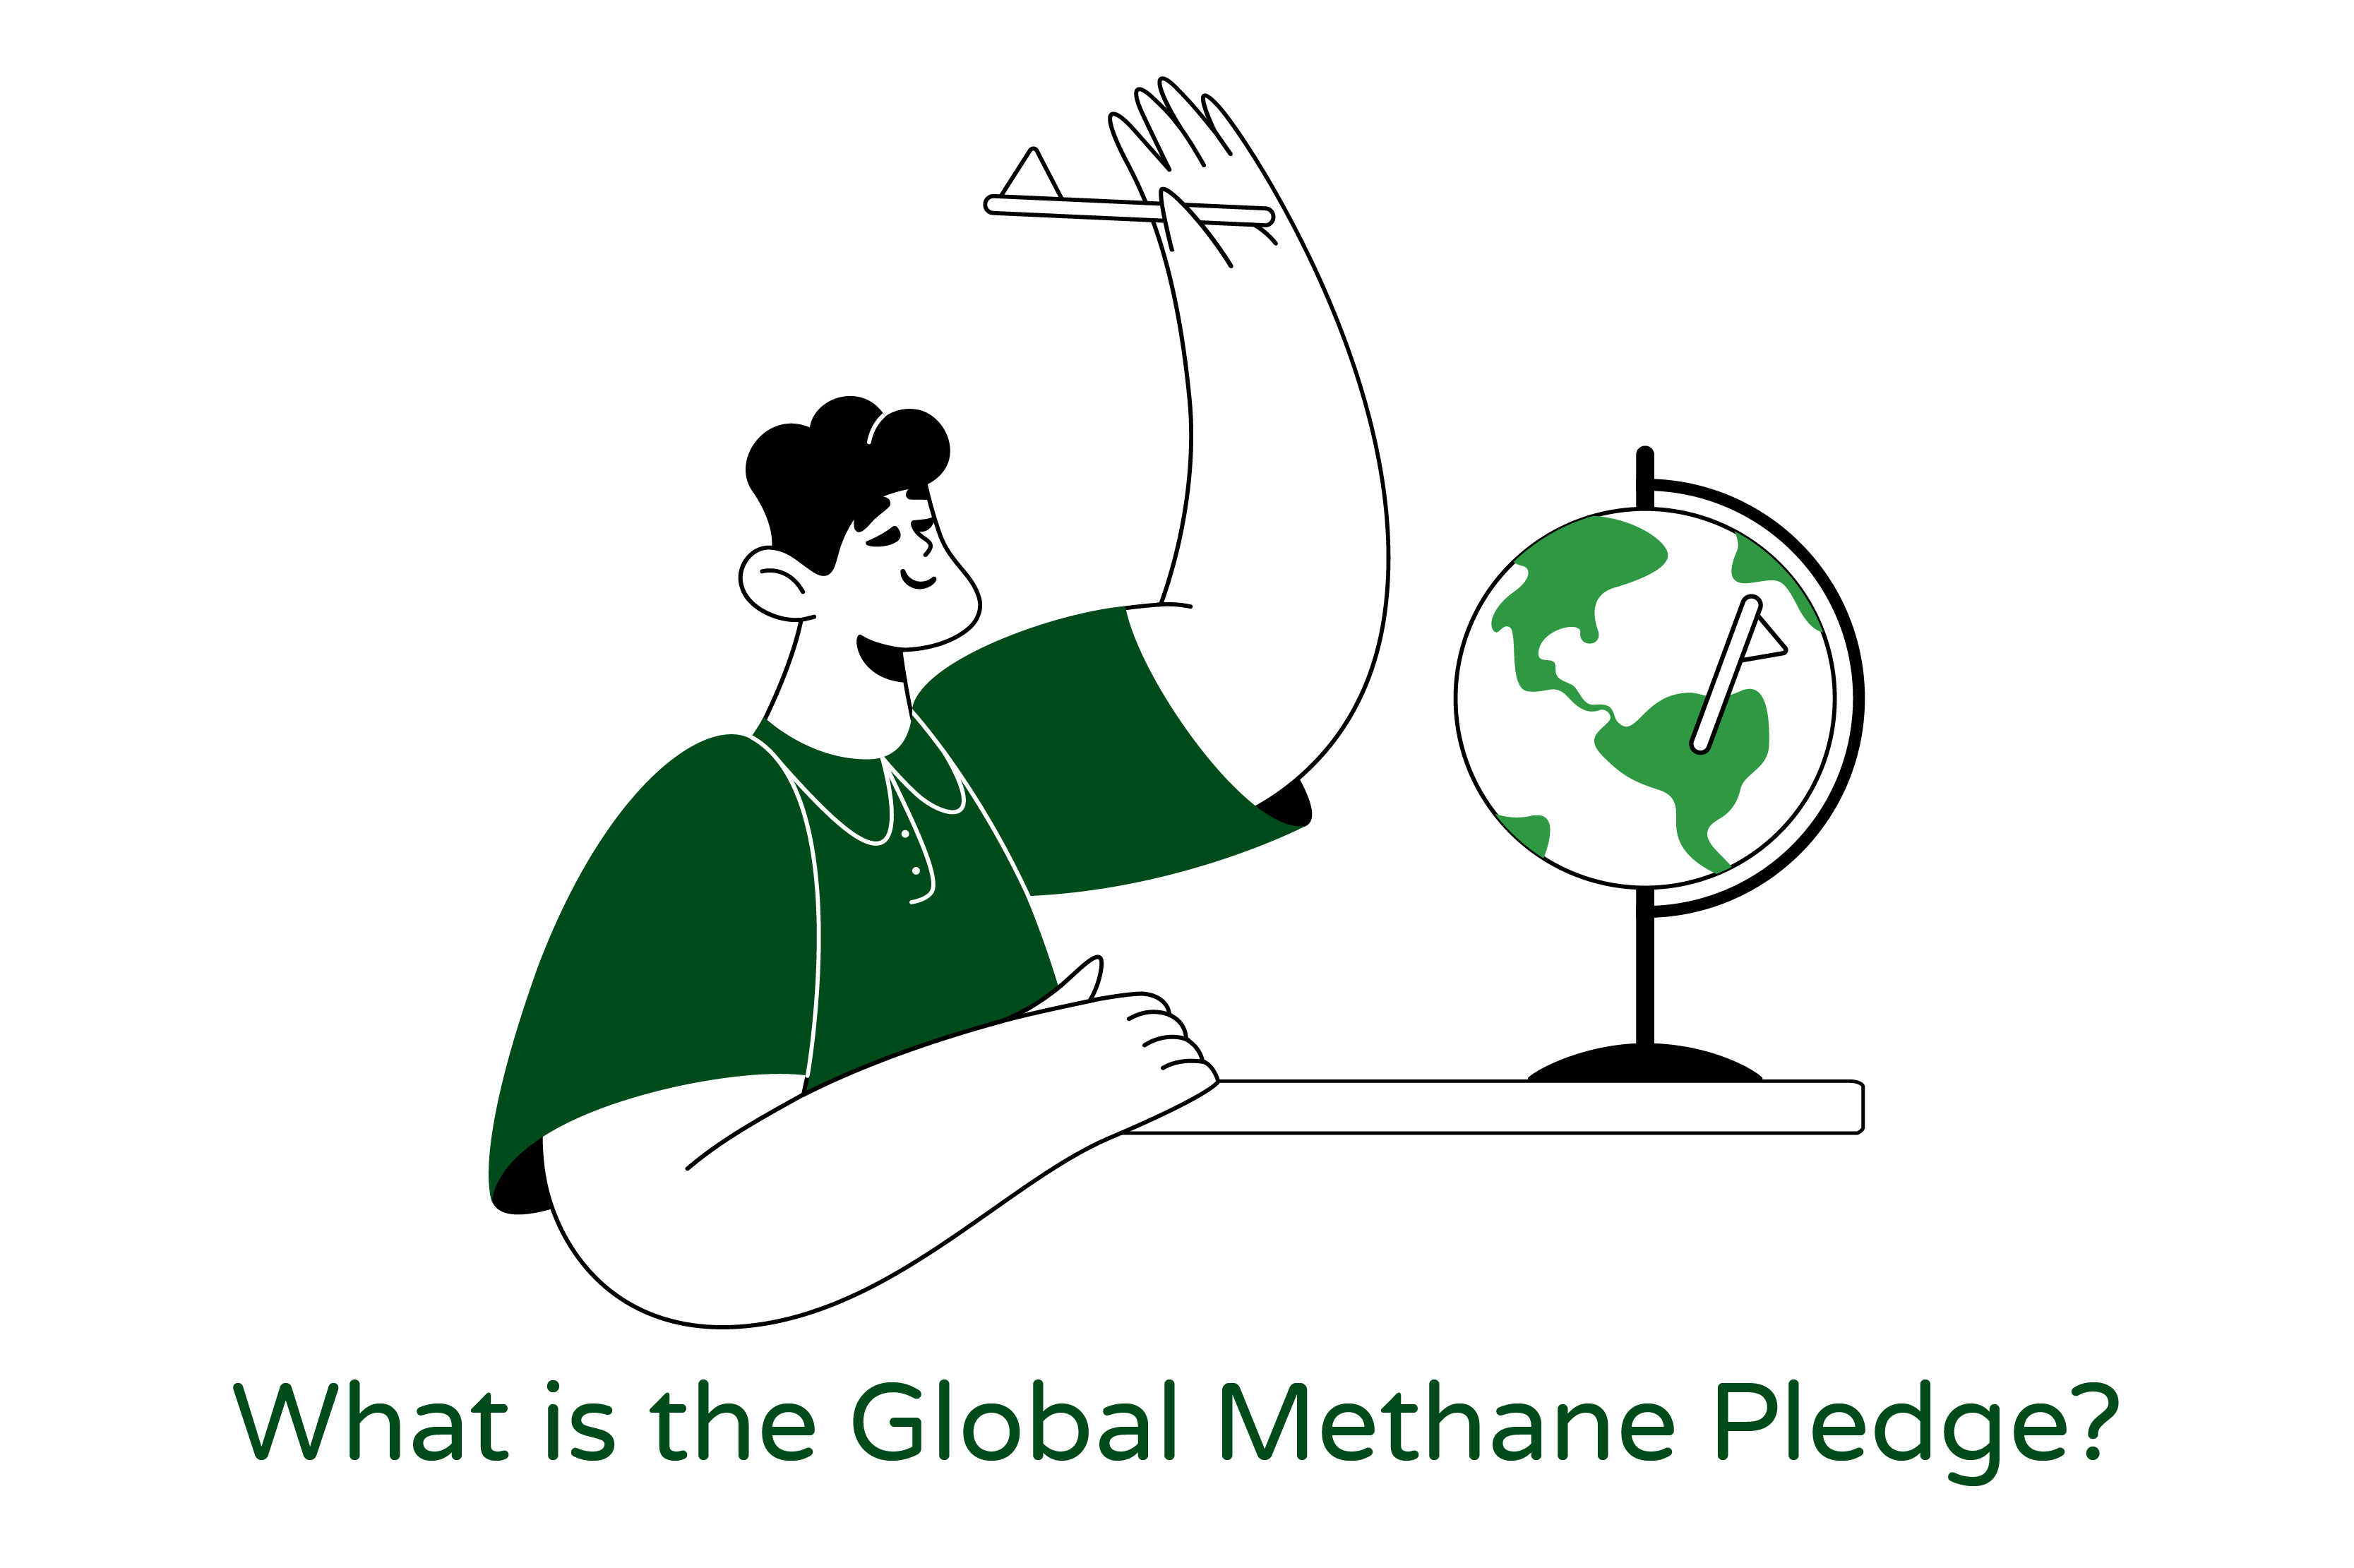 An image depicting the concept of a global methane pledge. The visual shows a globe icon with a person sitting in front of it, holding a flag in their hand to symbolize their pledge. The image highlights the global nature of the pledge, suggesting that people from around the world are coming together to address the issue of methane emissions. The use of the flag suggests that this is a personal commitment, and that individuals can play a role in reducing methane emissions.